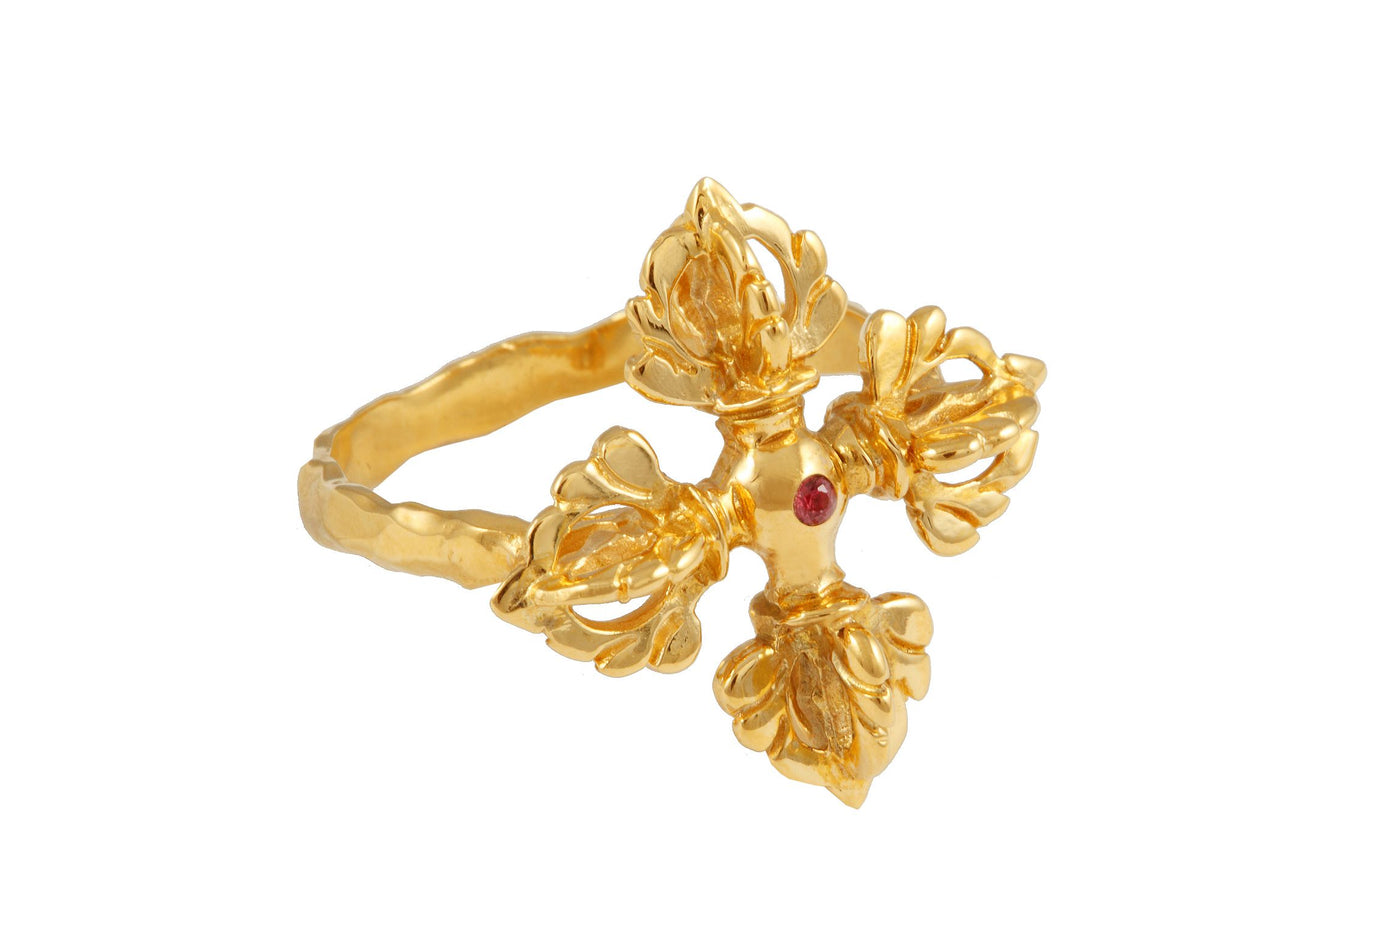 Vajra ring. Gold plated, pink sapphire